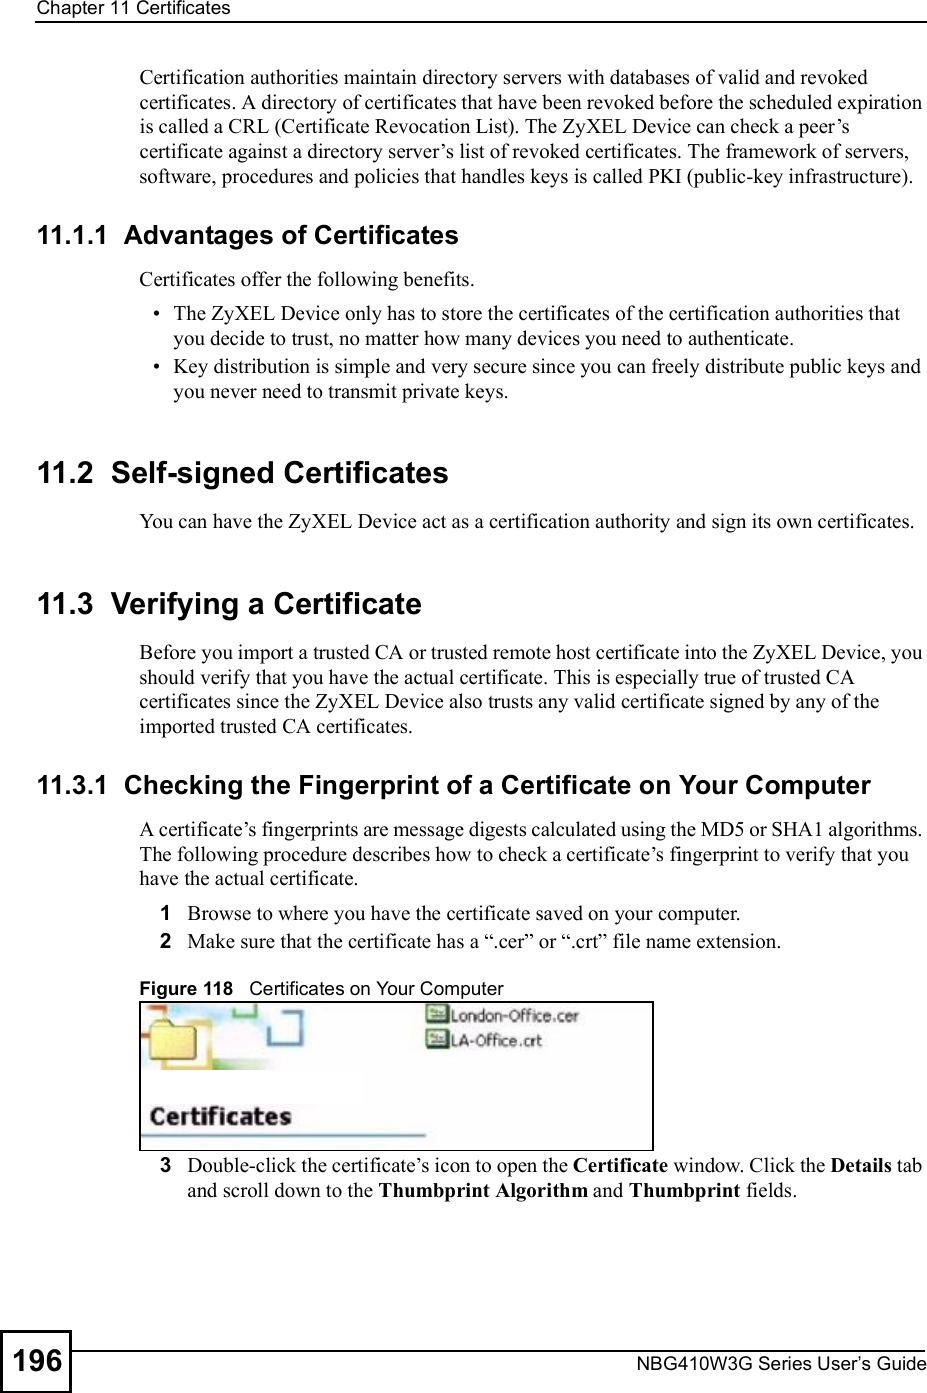 Chapter 11CertificatesNBG410W3G Series User s Guide196Certification authorities maintain directory servers with databases of valid and revoked certificates. A directory of certificates that have been revoked before the scheduled expiration is called a CRL (Certificate Revocation List). The ZyXEL Device can check a peer!s certificate against a directory server!s list of revoked certificates. The framework of servers, software, procedures and policies that handles keys is called PKI (public-key infrastructure).11.1.1  Advantages of CertificatesCertificates offer the following benefits. The ZyXEL Device only has to store the certificates of the certification authorities that you decide to trust, no matter how many devices you need to authenticate.  Key distribution is simple and very secure since you can freely distribute public keys and you never need to transmit private keys.11.2  Self-signed CertificatesYou can have the ZyXEL Device act as a certification authority and sign its own certificates.11.3  Verifying a CertificateBefore you import a trusted CA or trusted remote host certificate into the ZyXEL Device, you should verify that you have the actual certificate. This is especially true of trusted CA certificates since the ZyXEL Device also trusts any valid certificate signed by any of the imported trusted CA certificates.11.3.1  Checking the Fingerprint of a Certificate on Your ComputerA certificate!s fingerprints are message digests calculated using the MD5 or SHA1 algorithms. The following procedure describes how to check a certificate!s fingerprint to verify that you have the actual certificate. 1Browse to where you have the certificate saved on your computer. 2Make sure that the certificate has a &quot;.cer# or &quot;.crt# file name extension.Figure 118   Certificates on Your Computer3Double-click the certificate!s icon to open the Certificate window. Click the Details tab and scroll down to the Thumbprint Algorithm and Thumbprint fields.